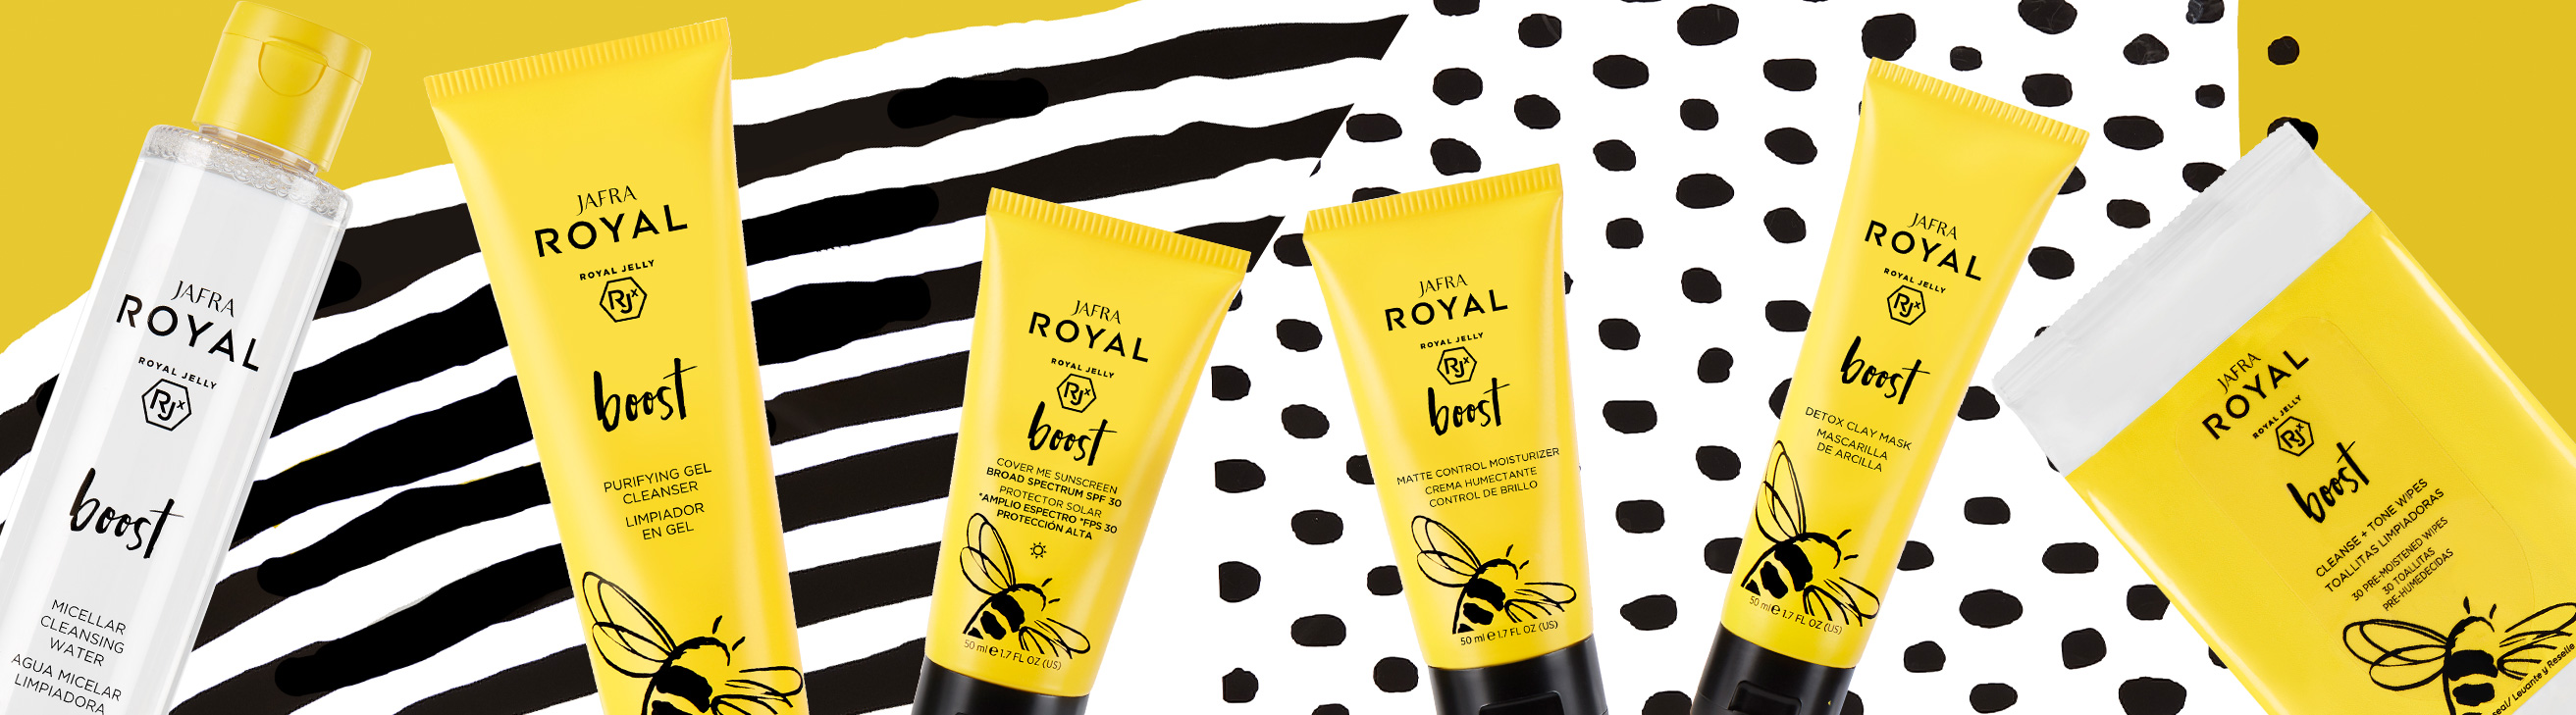 CATEGORY BANNER SKIN CARE RITUALS JAFRA ROYAL BOOST